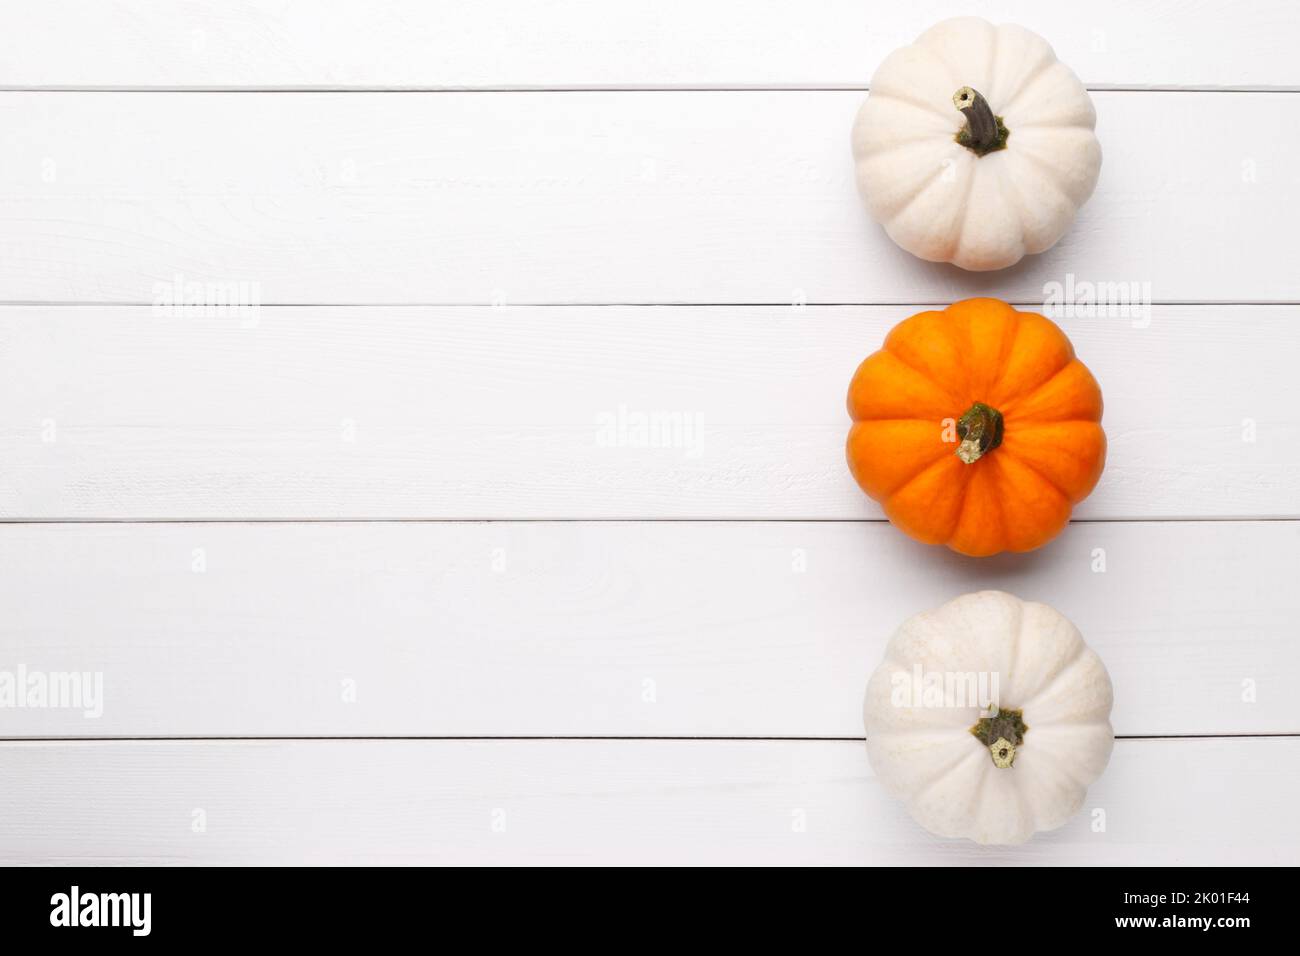 White and orange decorative pumpkins on the white wooden background, flat lay with copy space Stock Photo